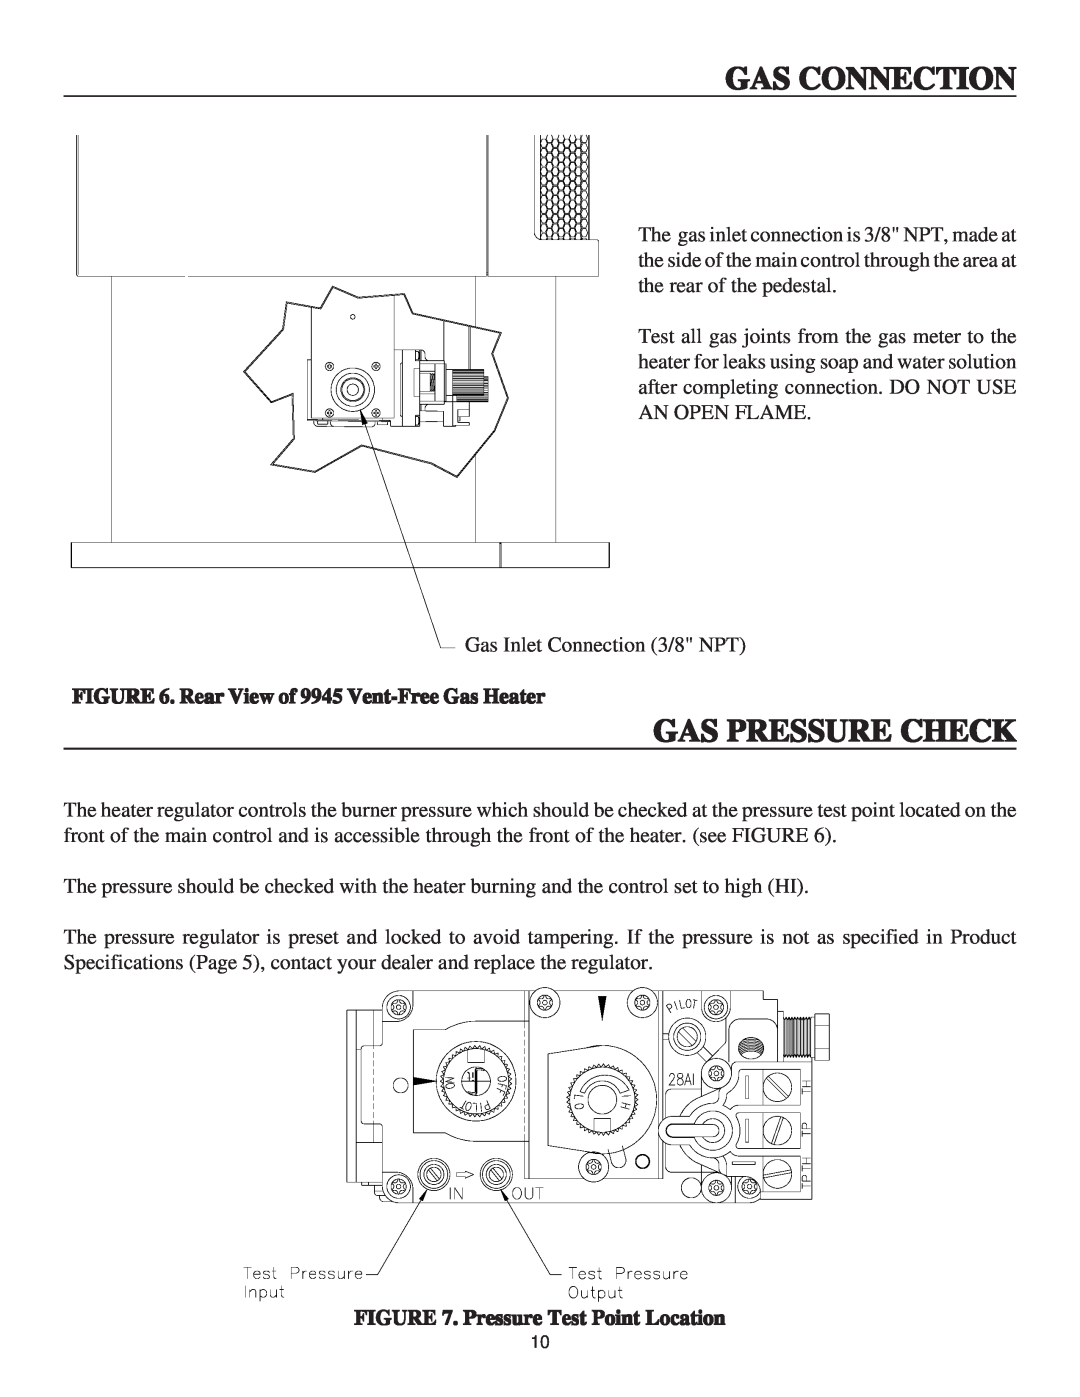 United States Stove B9945N manual Gas Pressure Check, Gas Connection, Rear View of 9945 Vent-FreeGas Heater 